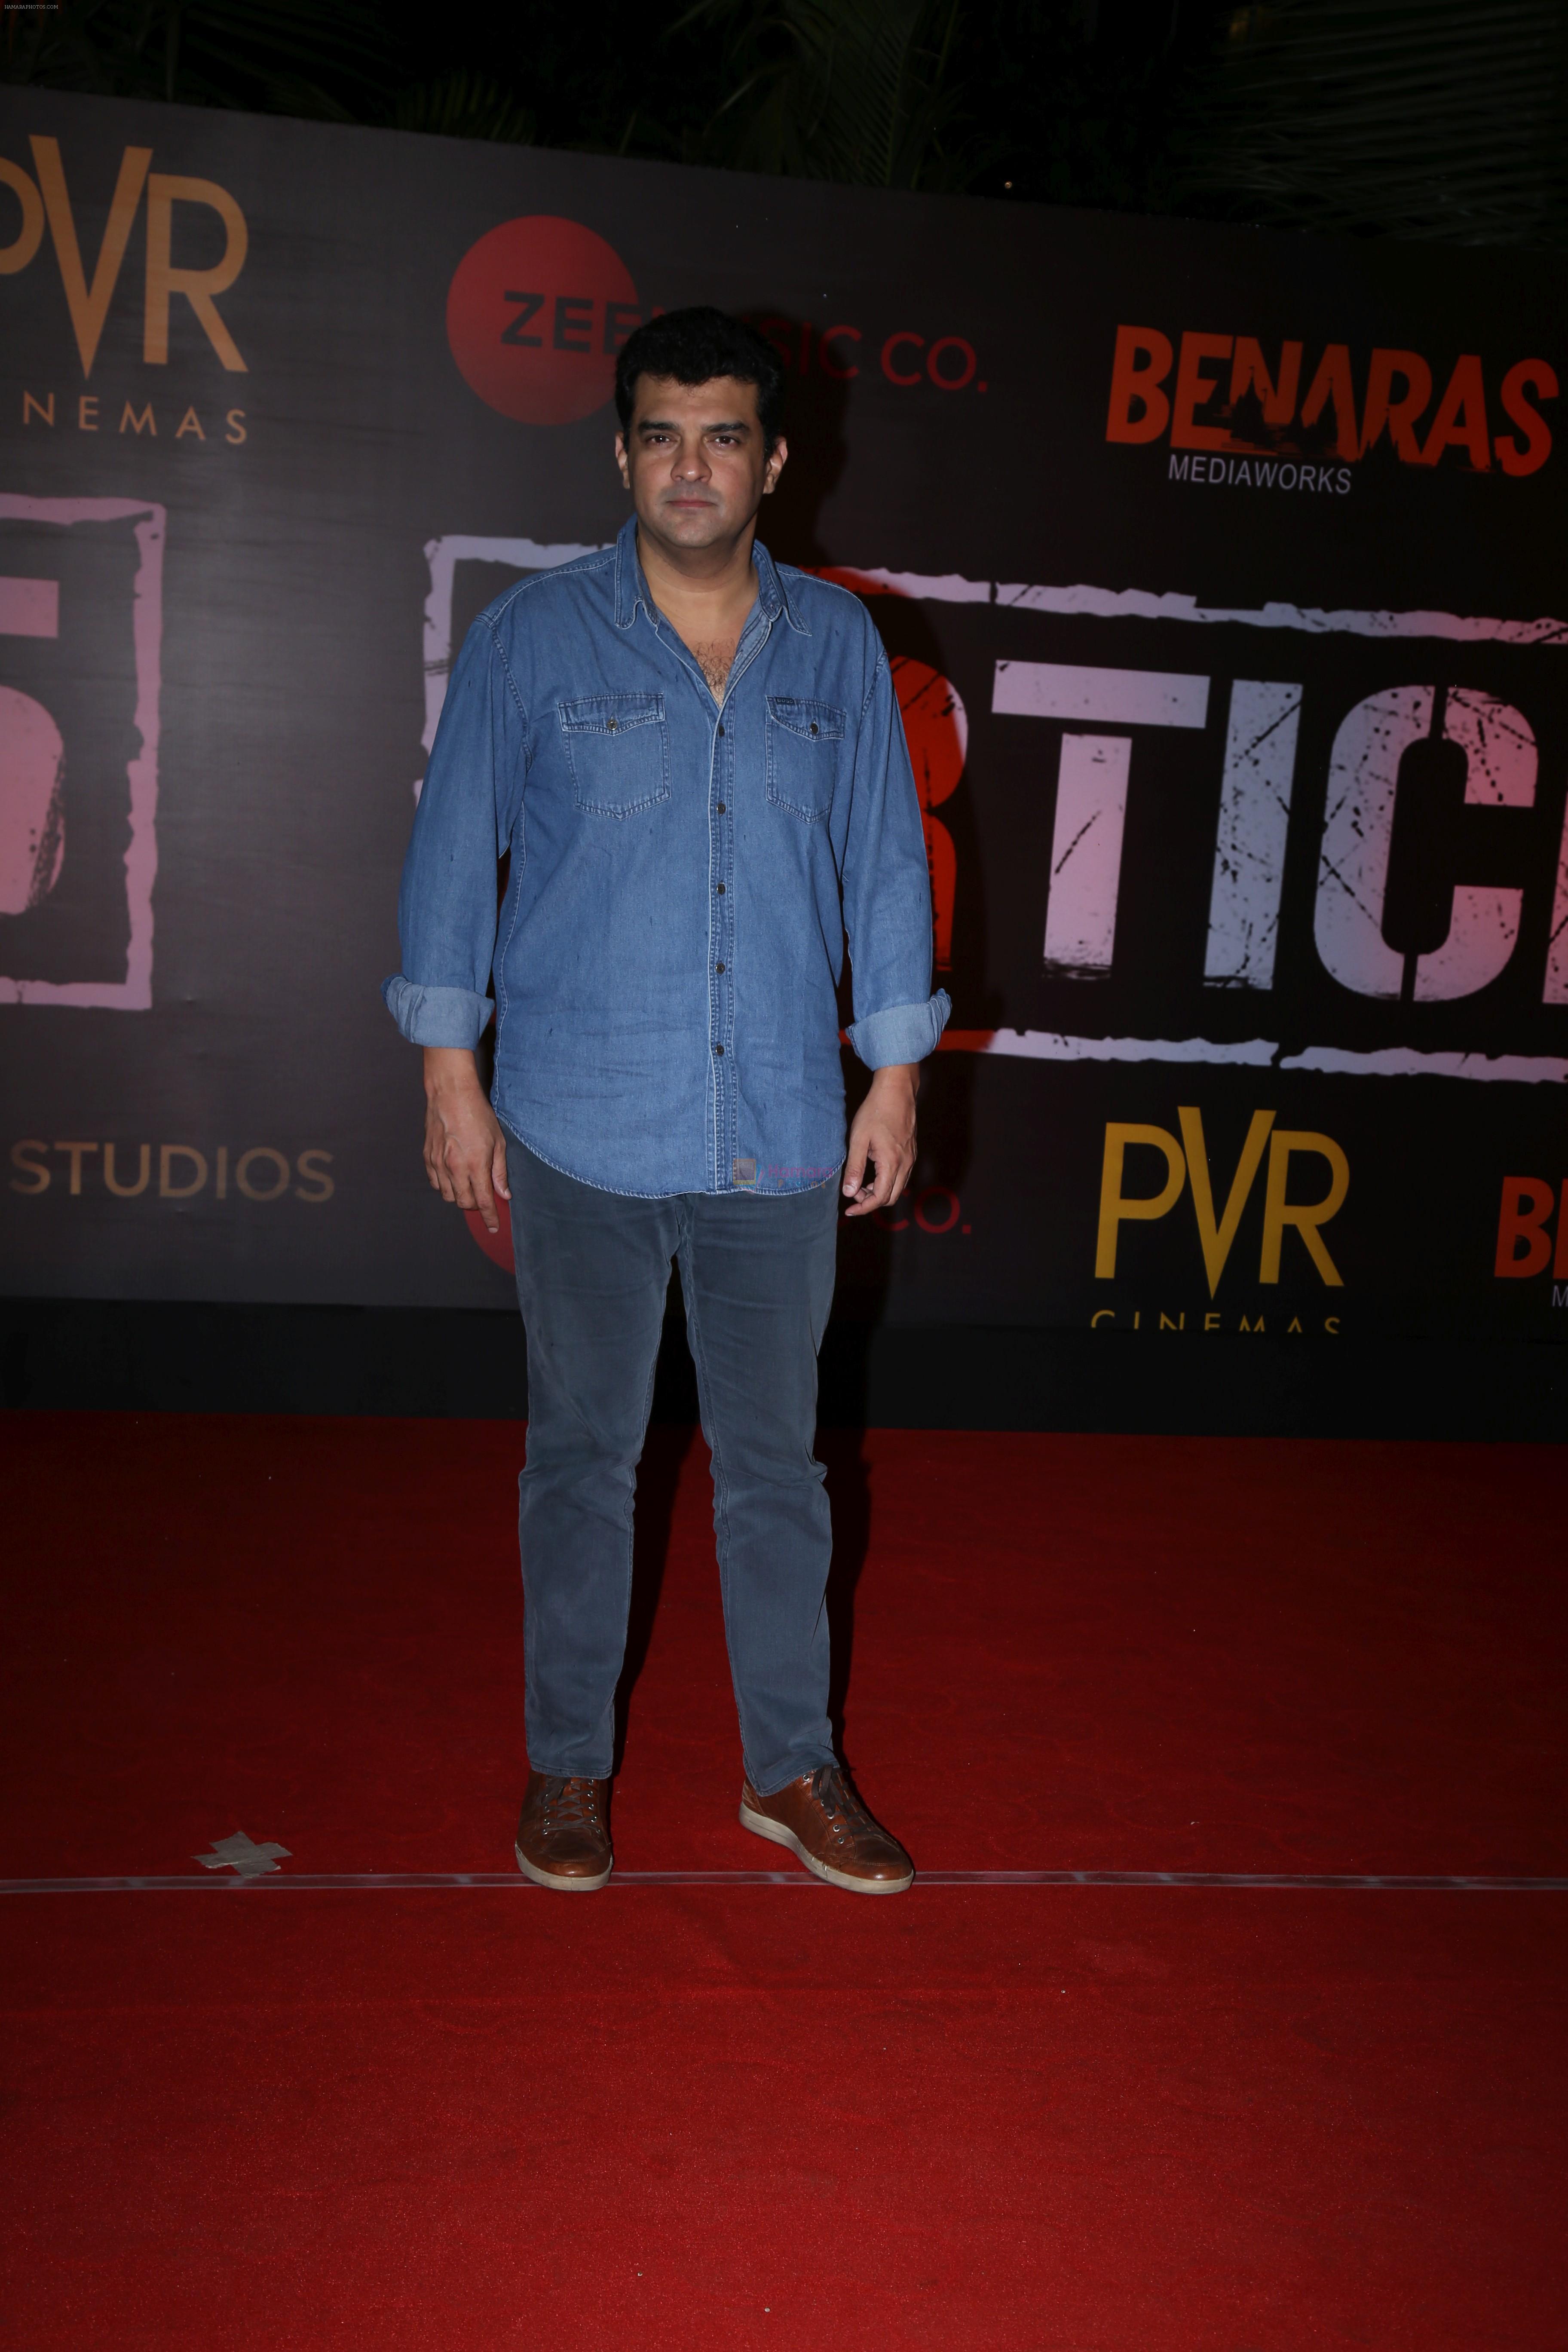 Siddharth Roy Kapoor at the Screening of film Article 15 in pvr icon, andheri on 26th June 2019